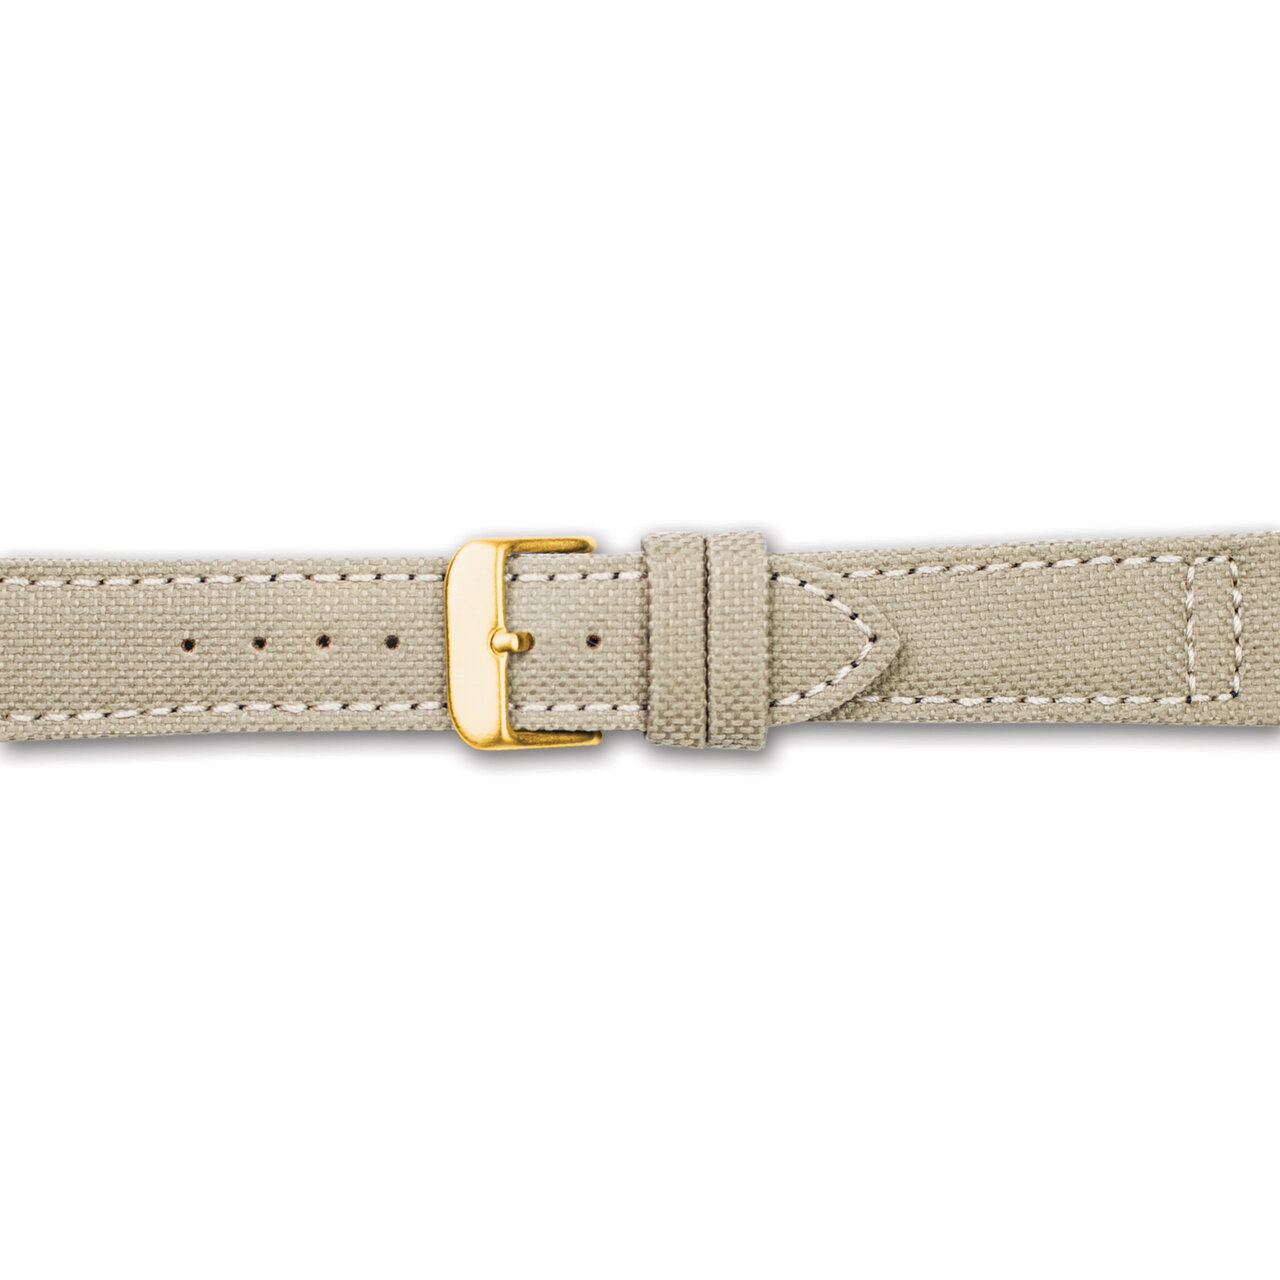 24mm Tan Canvas Leather Lining Gold-tone Buckle Watch Band BA388-24